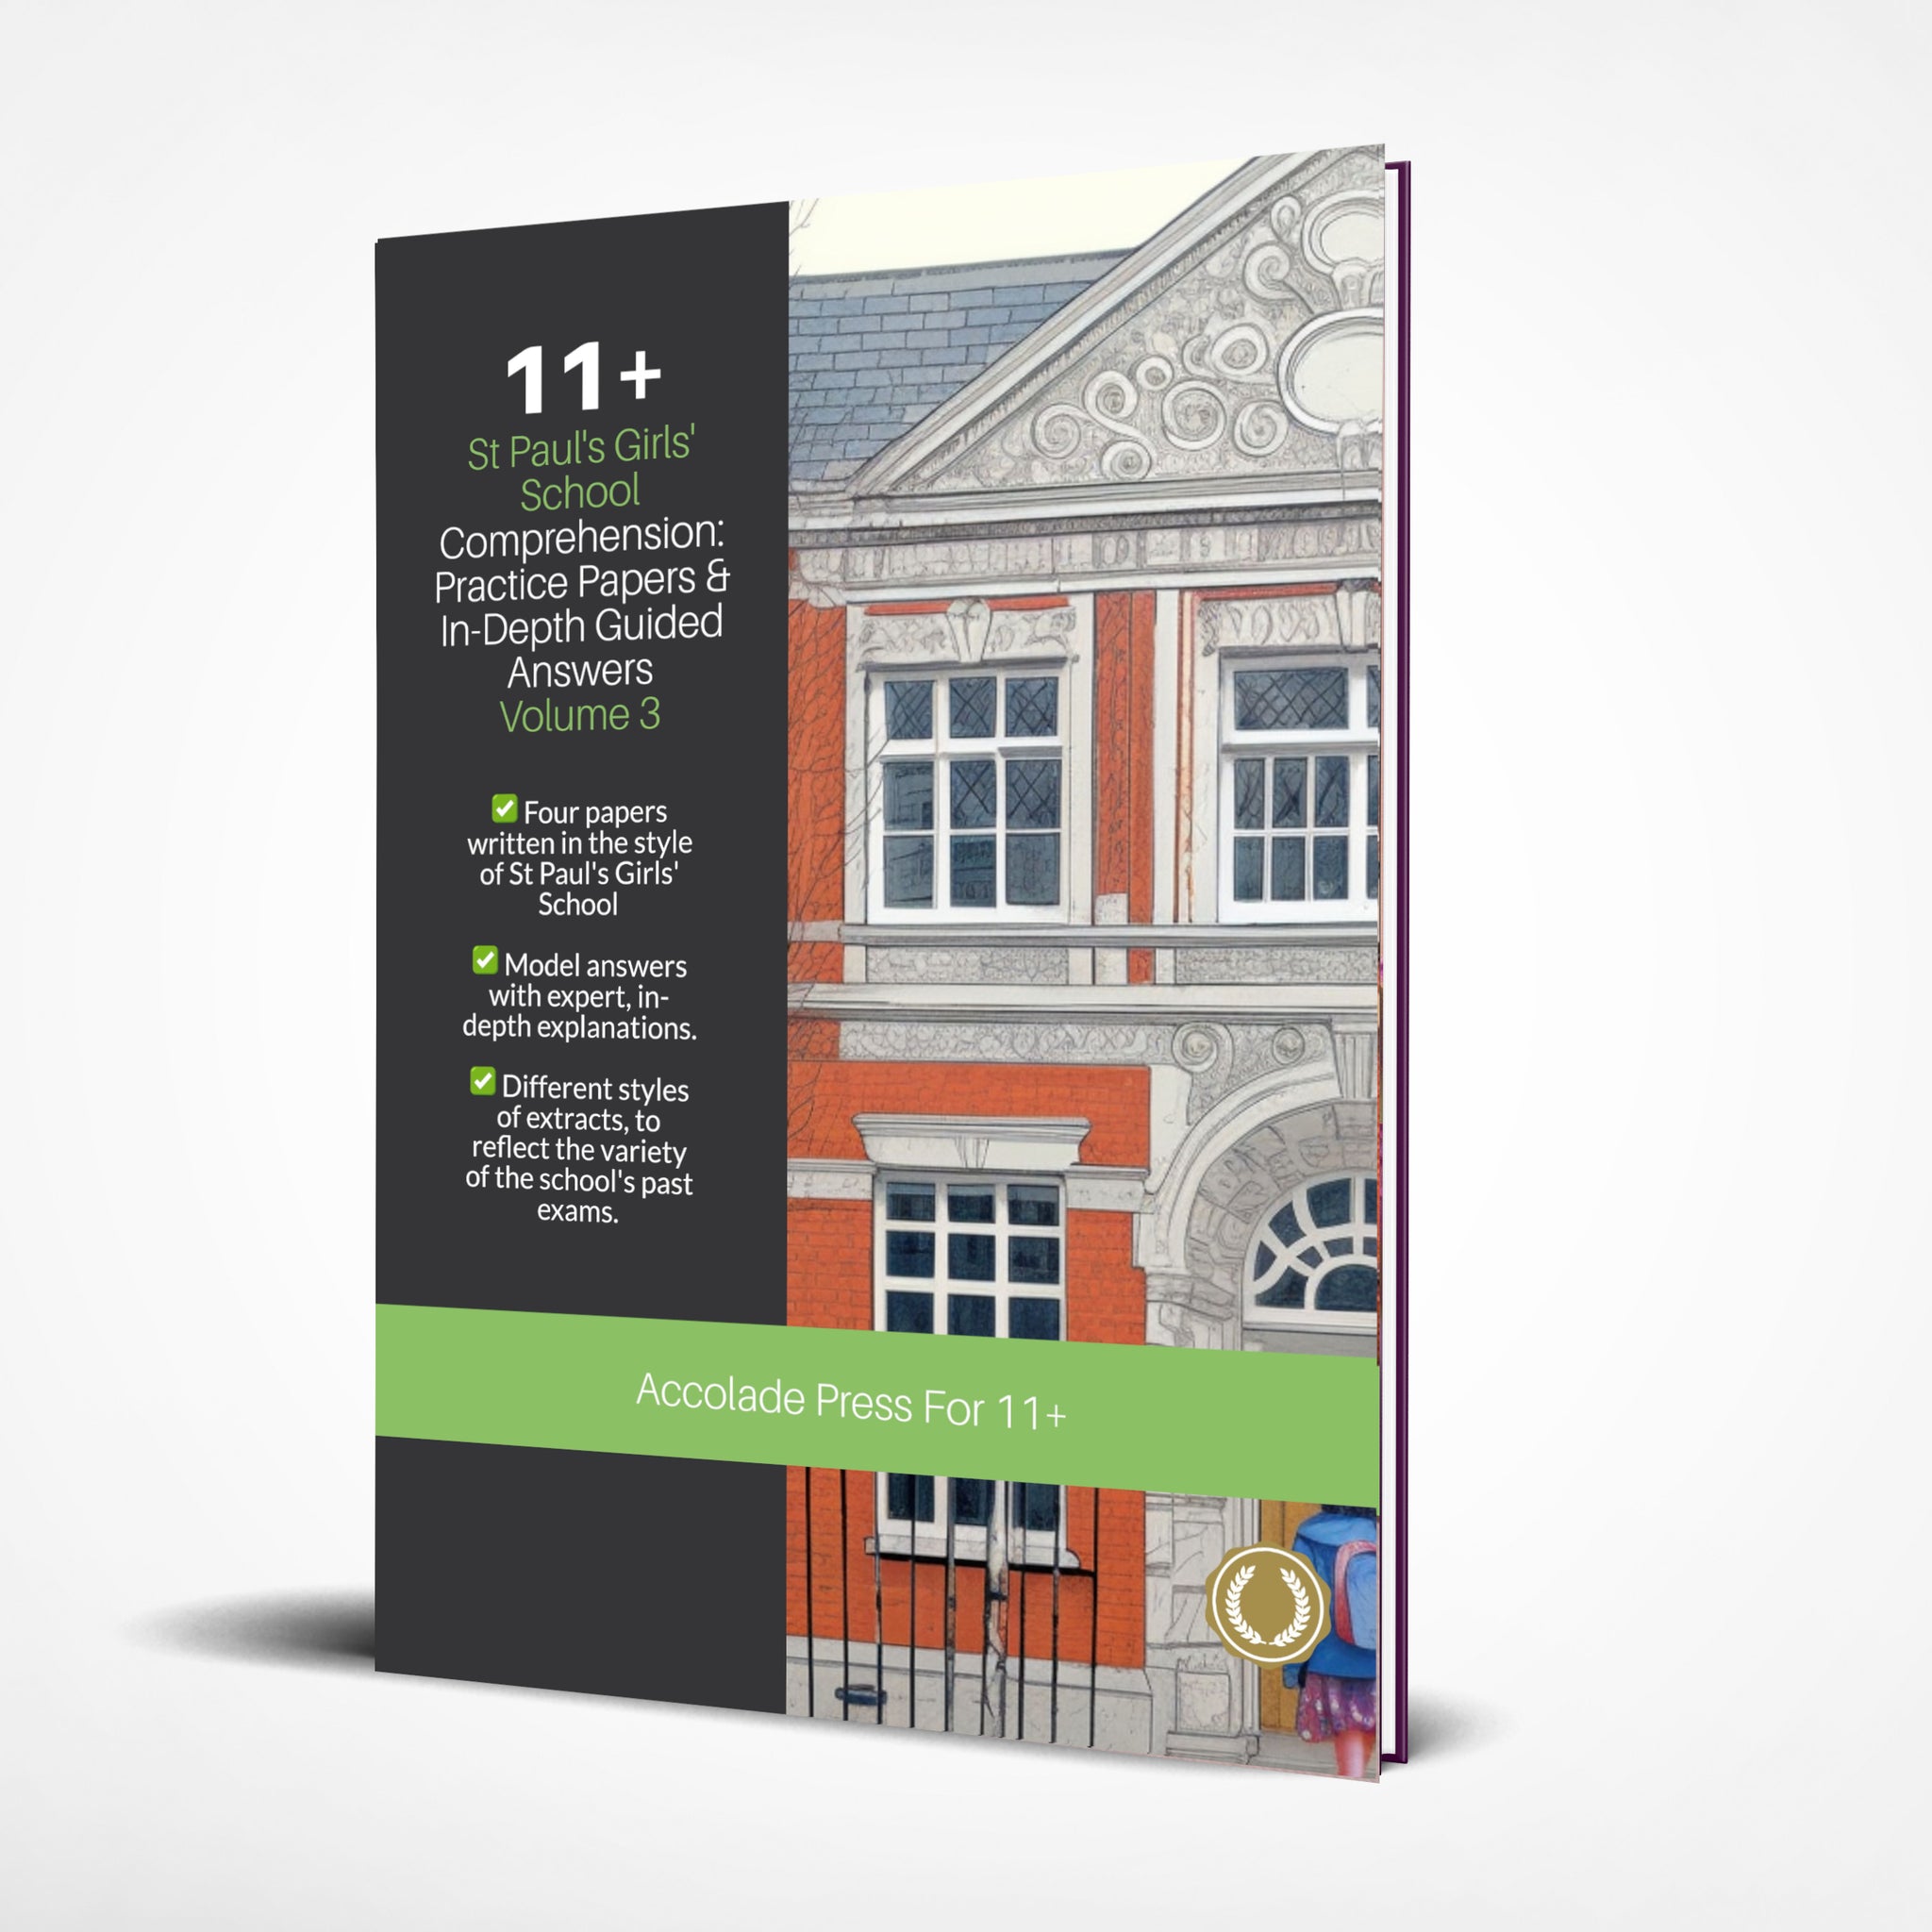 11+ Comprehension, St Paul's Girls' School: Practice Papers & In-Depth Guided Answers: Volume 3